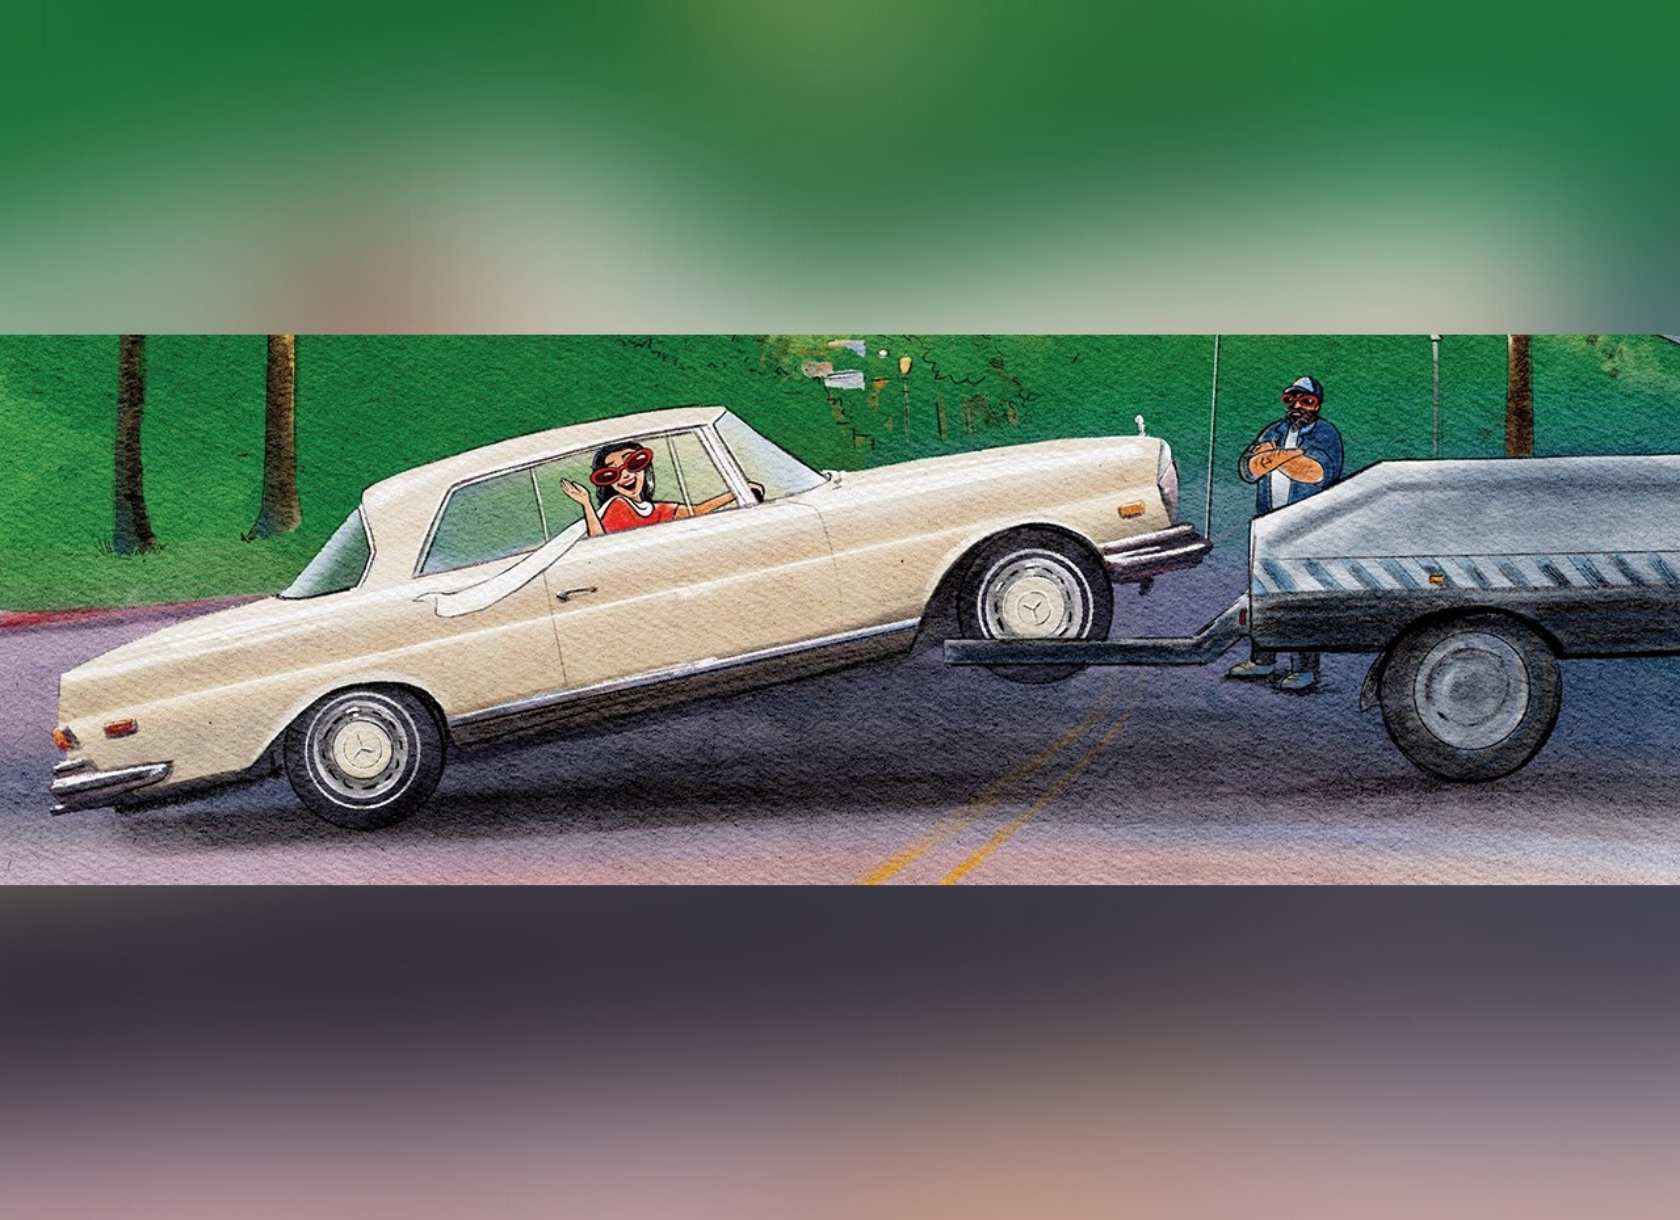 Illustration by Alexia Lozano of a woman in a car being towed